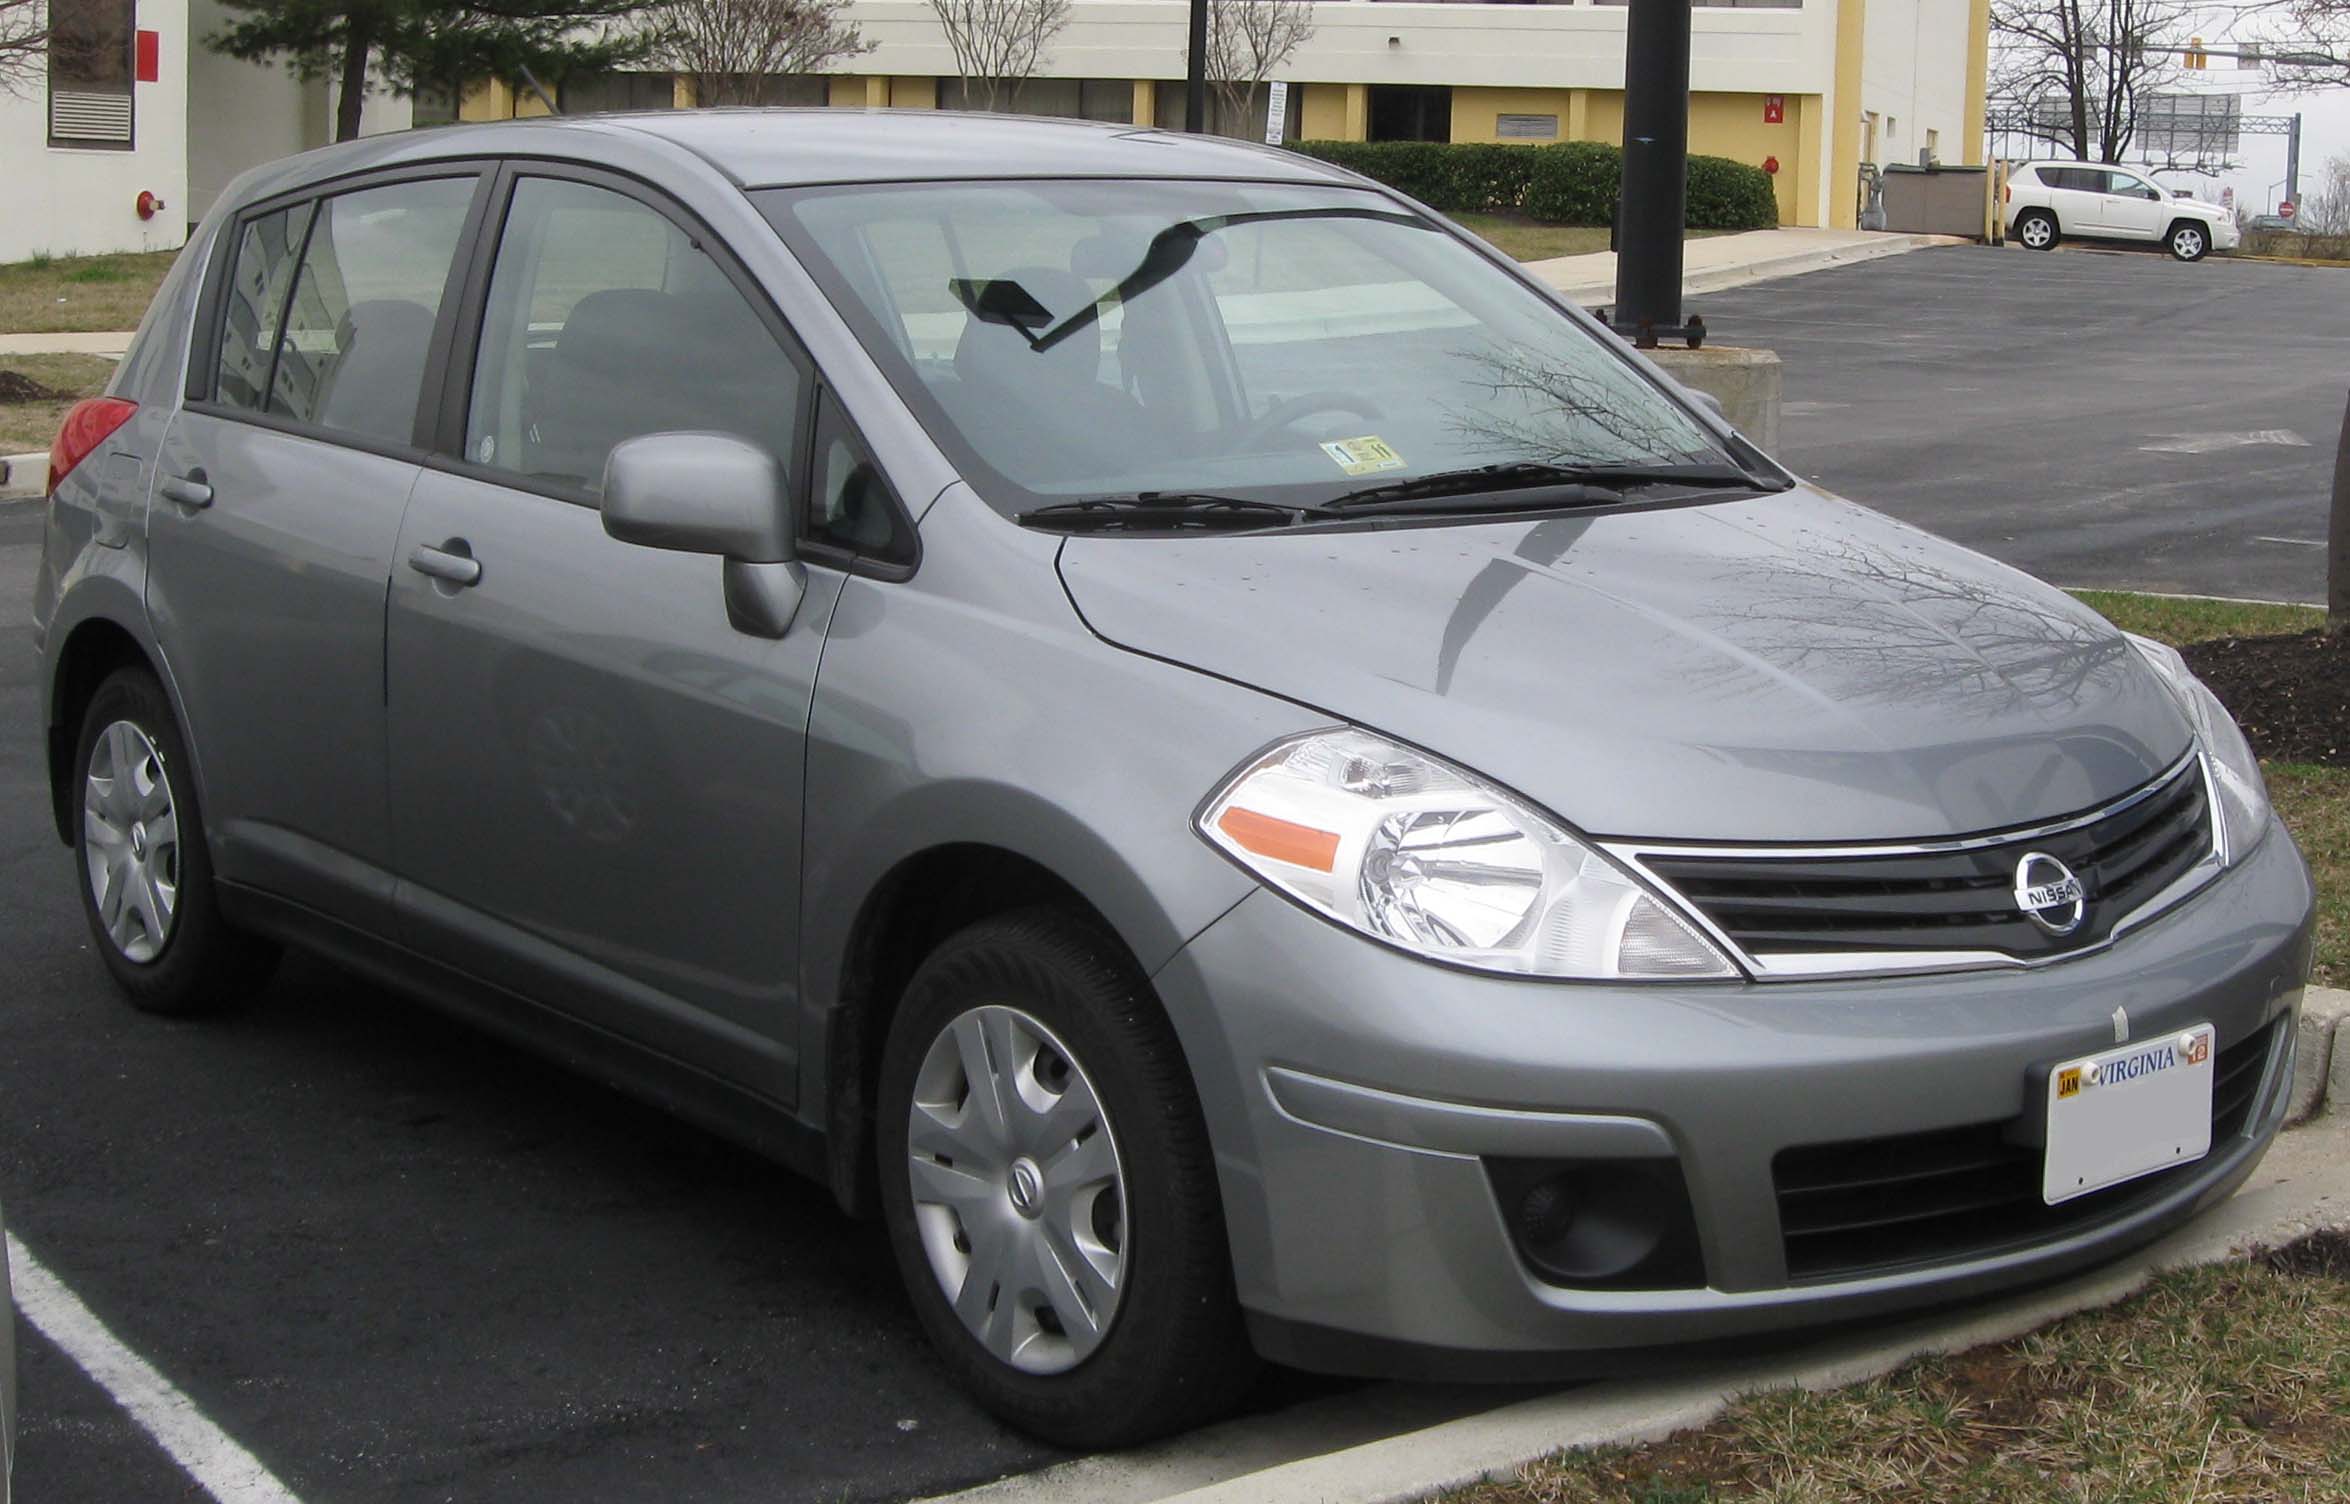 Nissan Versa 2010 Review, Amazing Pictures and Images